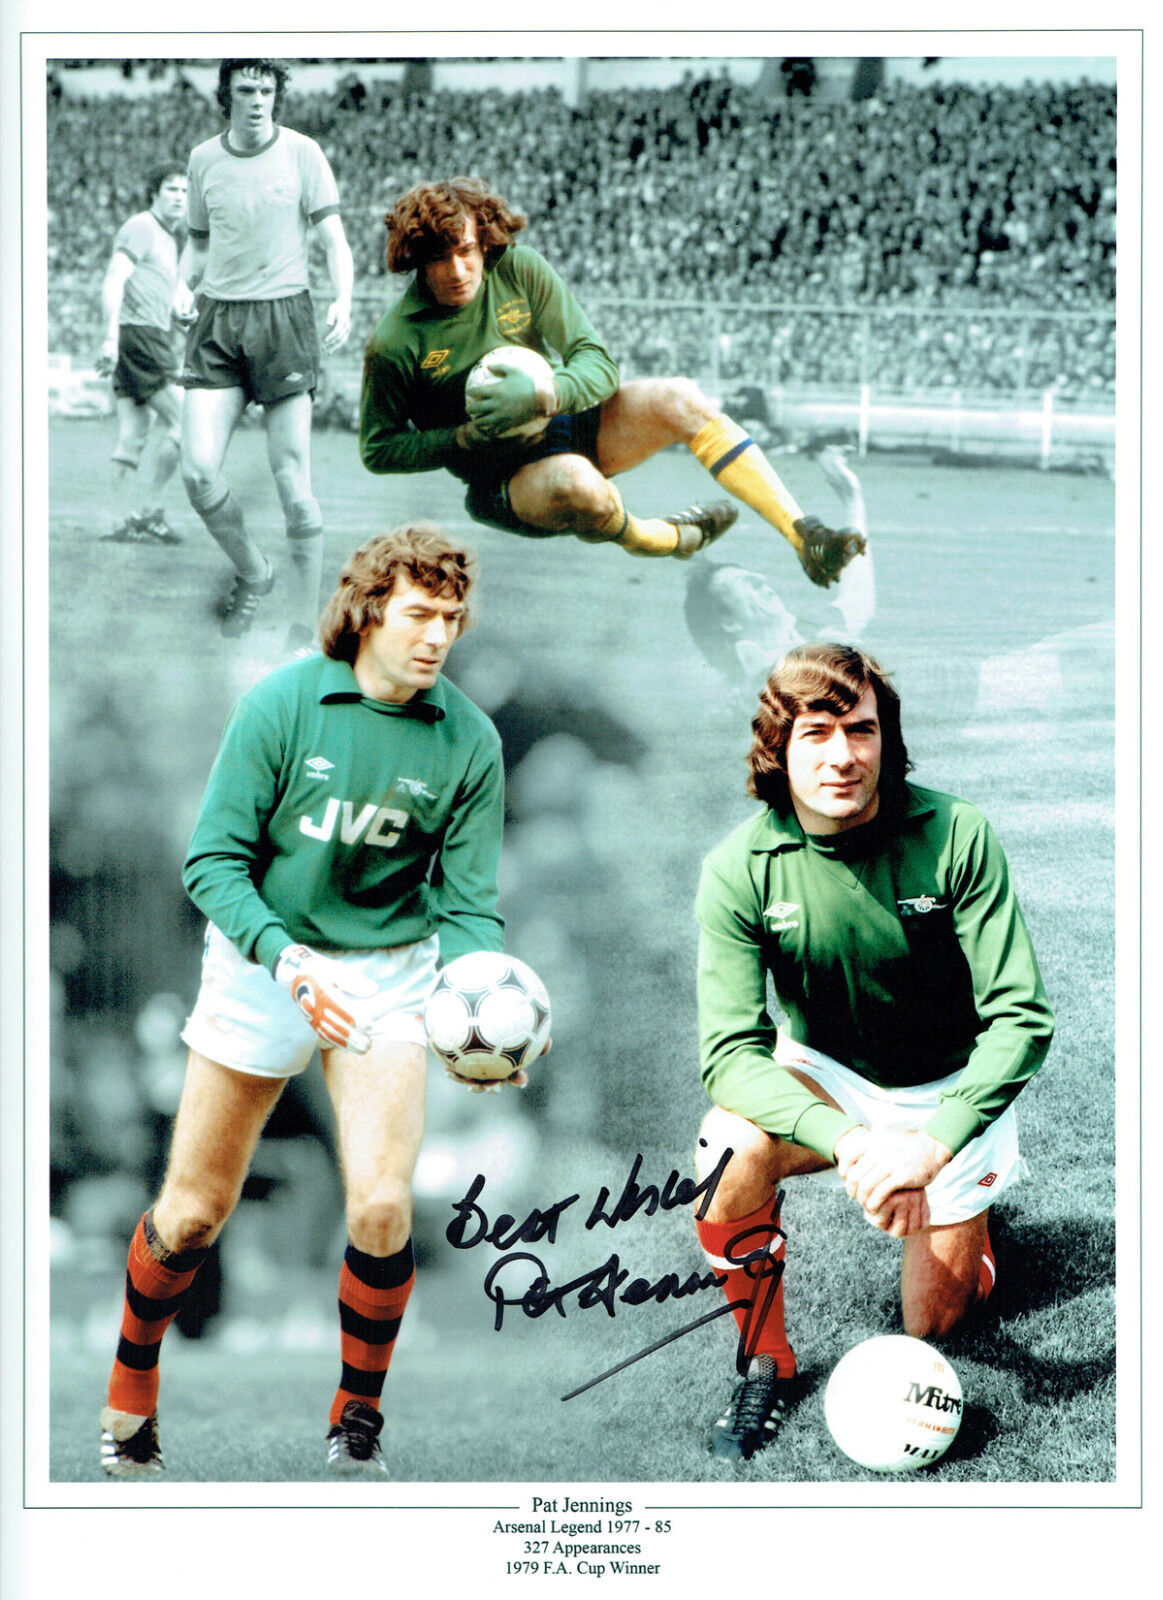 Pat JENNINGS Signed Autograph ARSENAL Montage 16x12 Photo Poster painting AFTAL COA